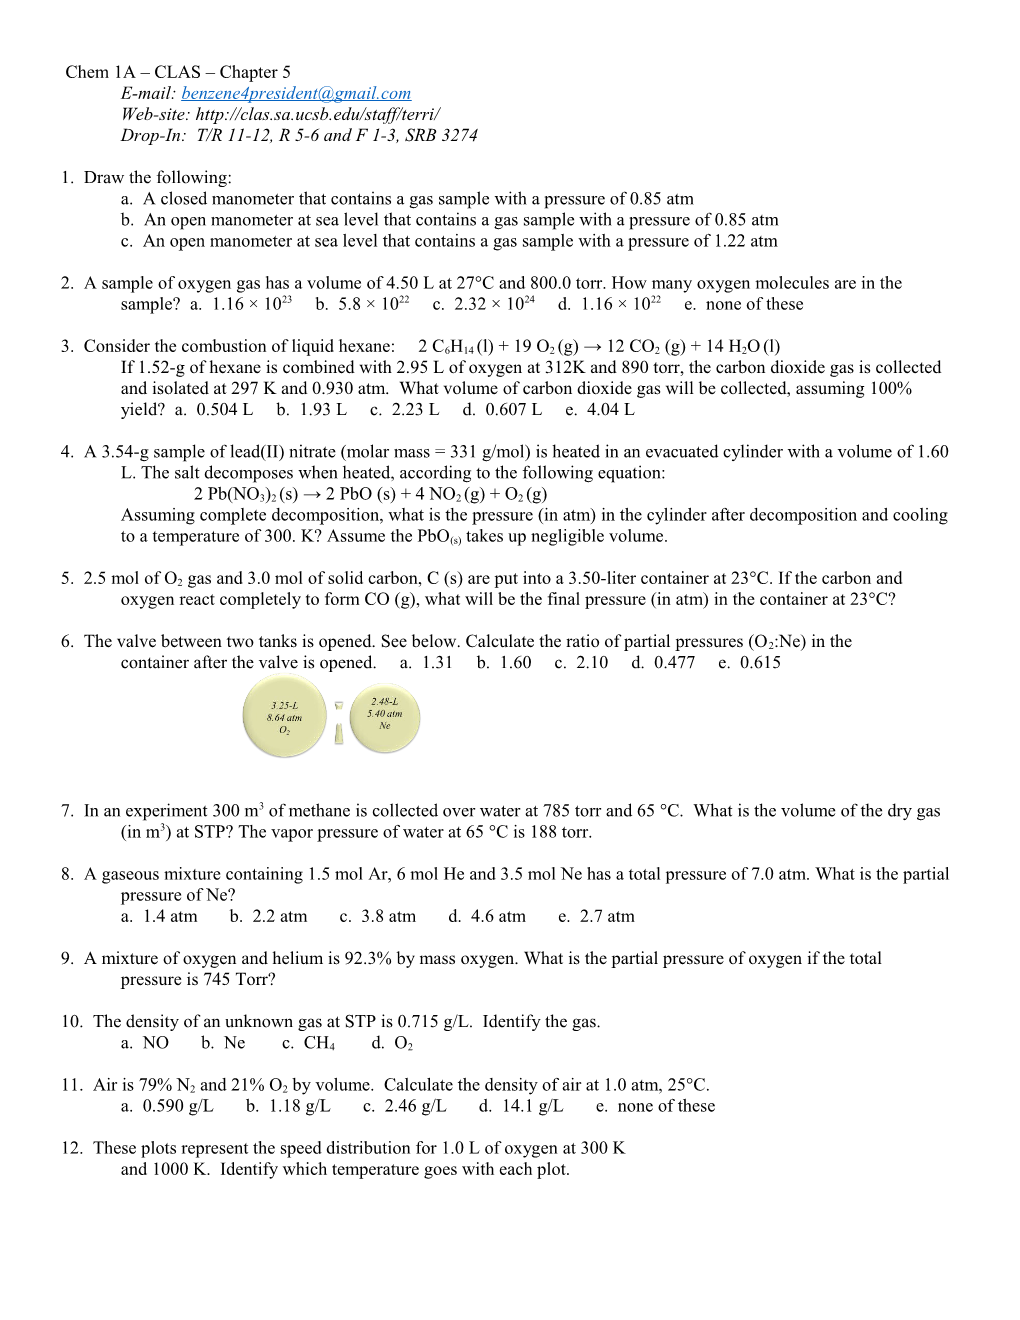 Chem 1A CLAS Chapter 5